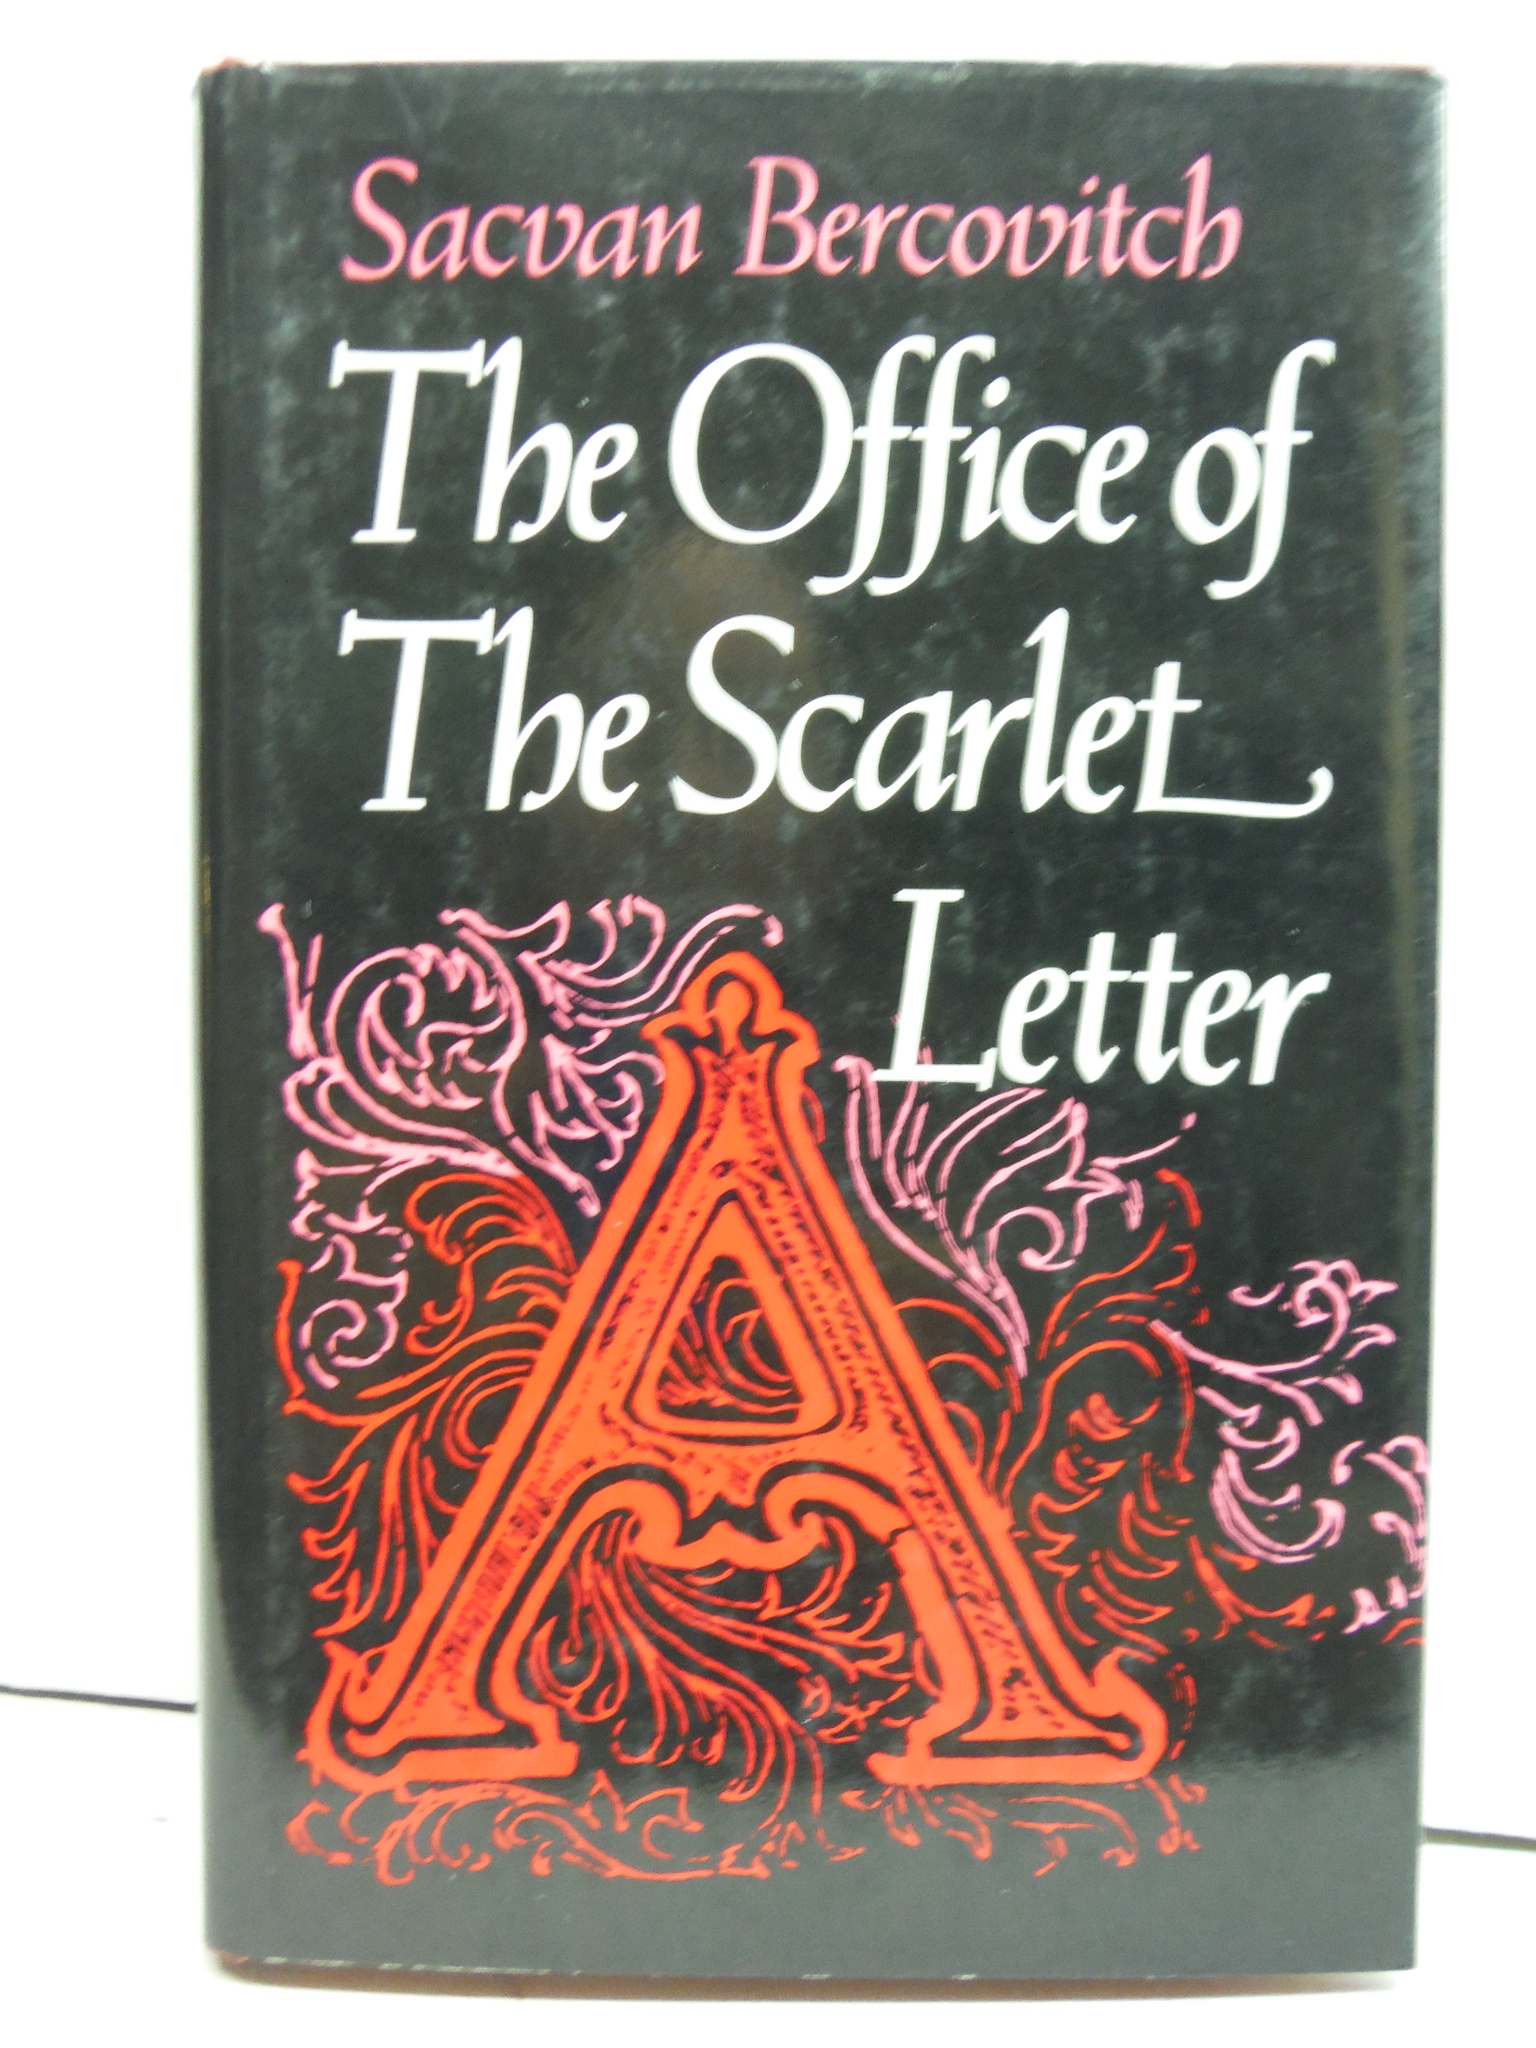 The Office of The Scarlet Letter (Parallax: Re-visions of Culture and Society)